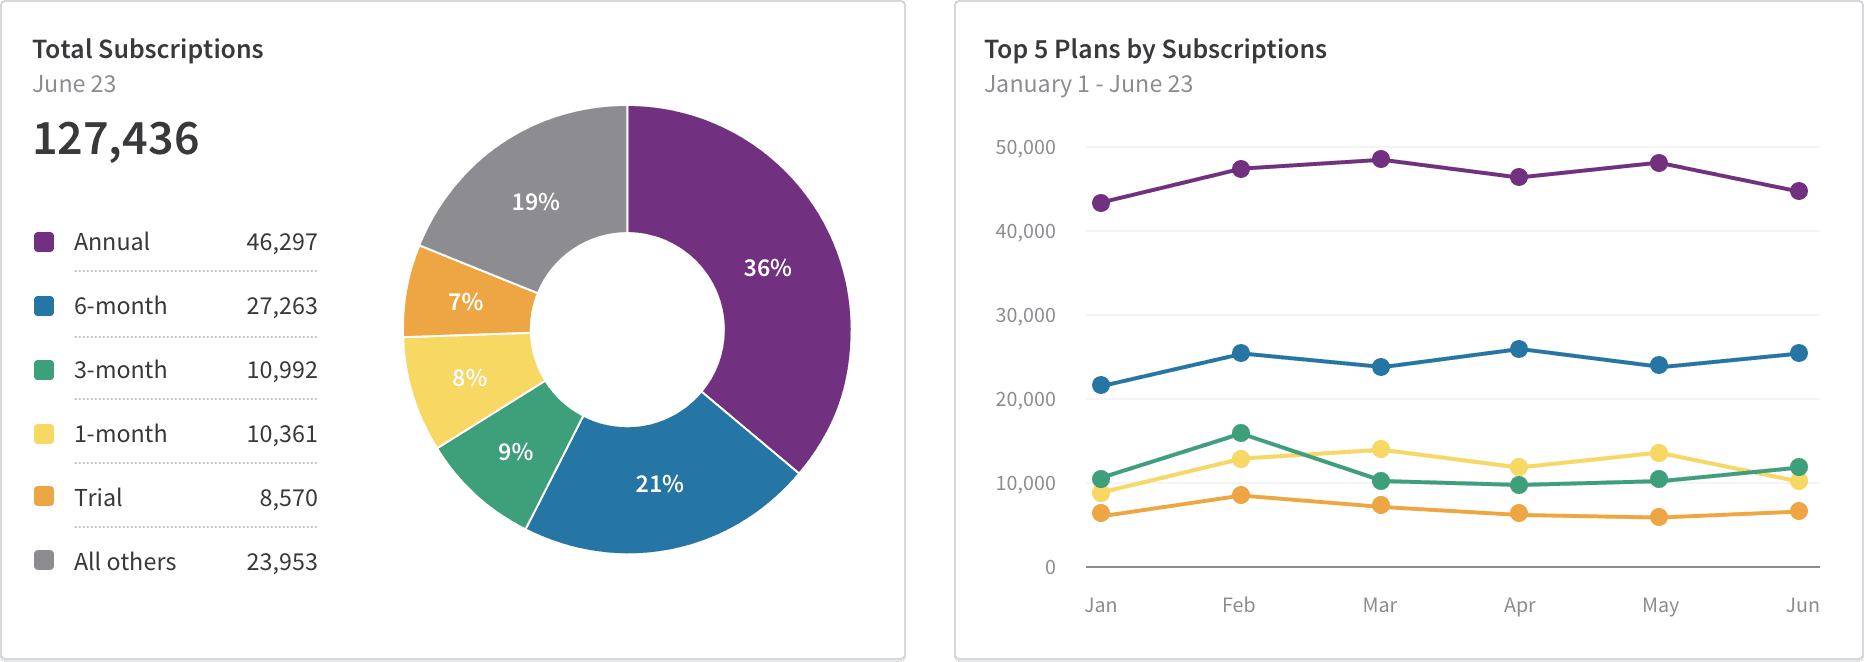 Total Subscriptions